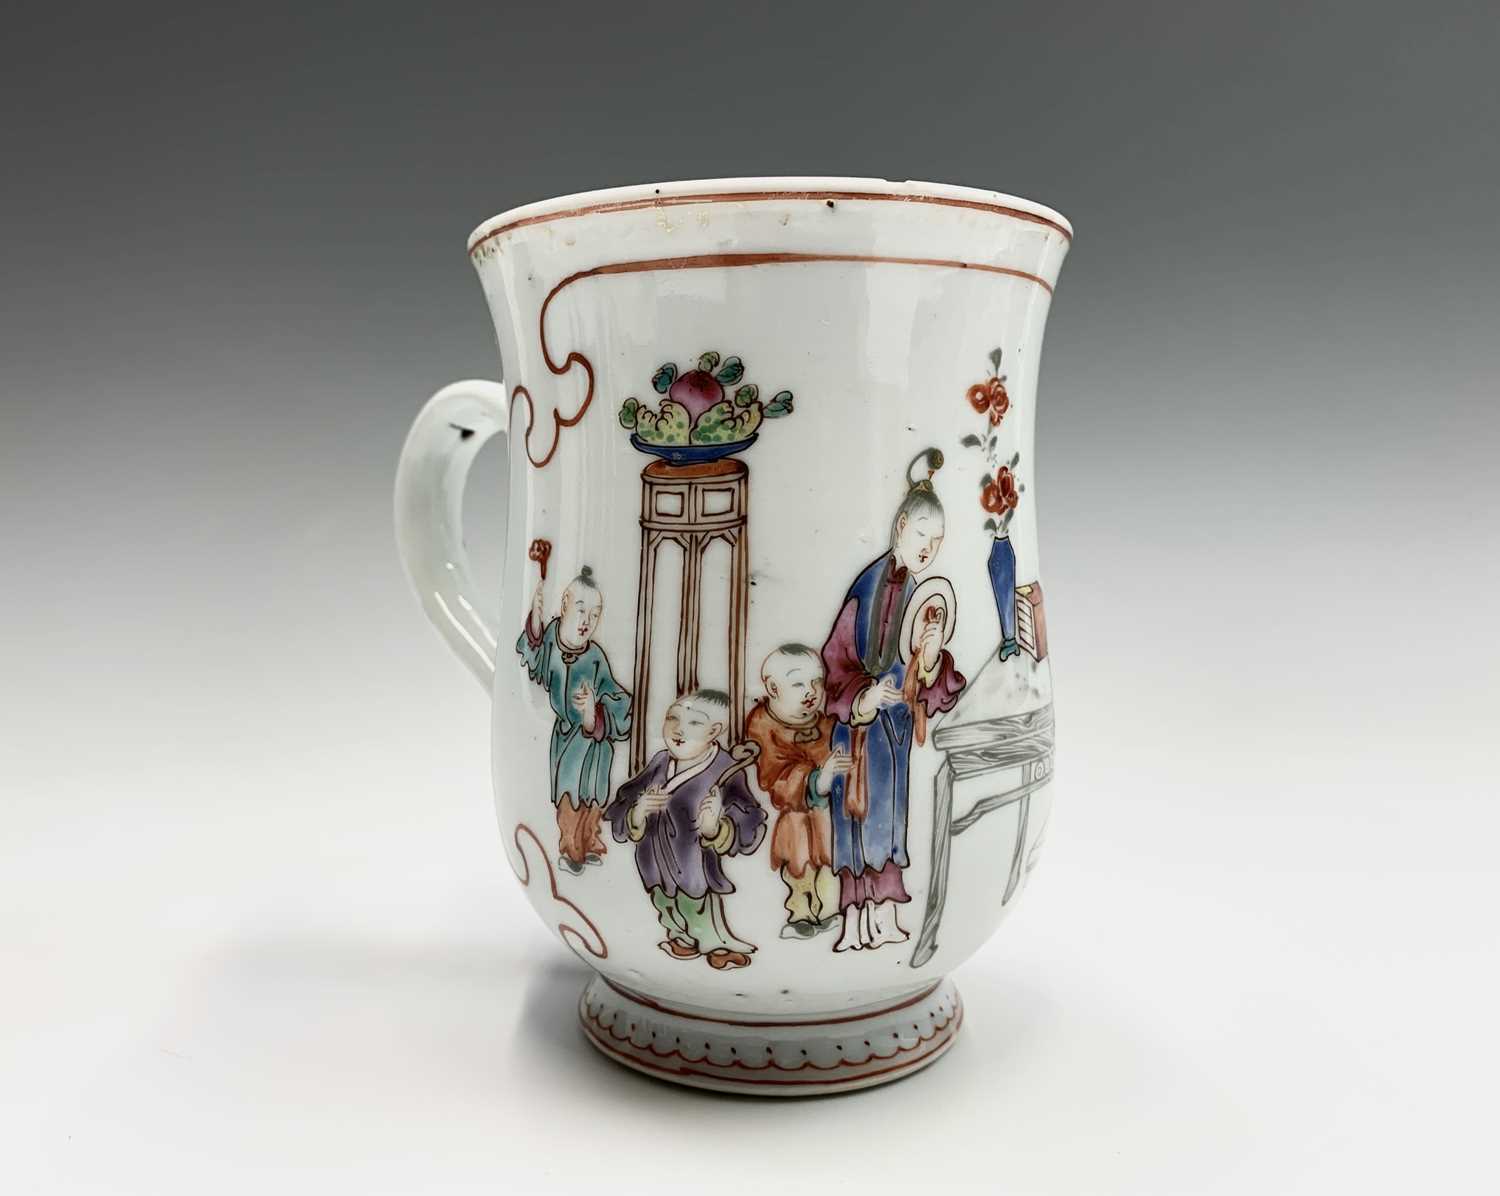 A Chinese famille rose export porcelain mug, 18th century, depicting an interior scene with a - Image 4 of 11